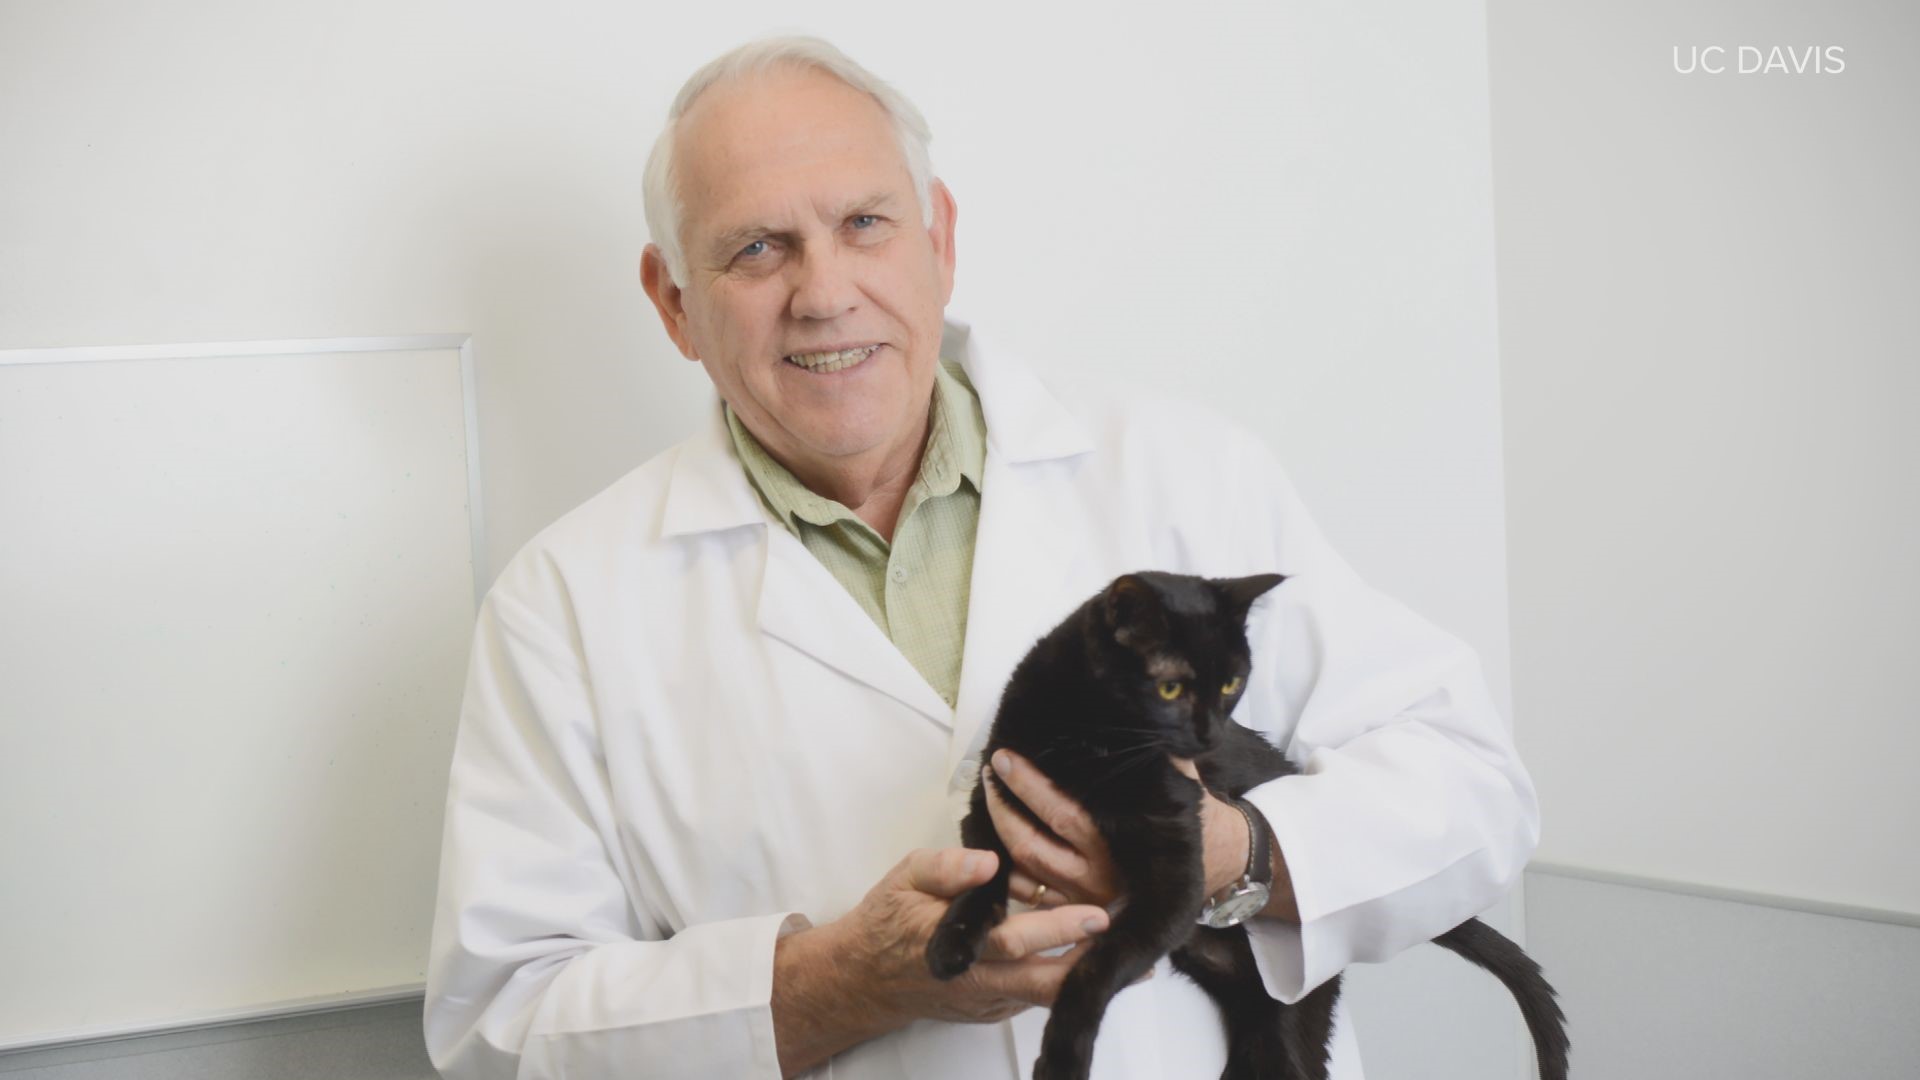 Dr. Niels Pedersen has spent 50 years studying the coronavirus, specifically a strain found in cats, called Feline Infectious Peritonitis or FIP, for short.